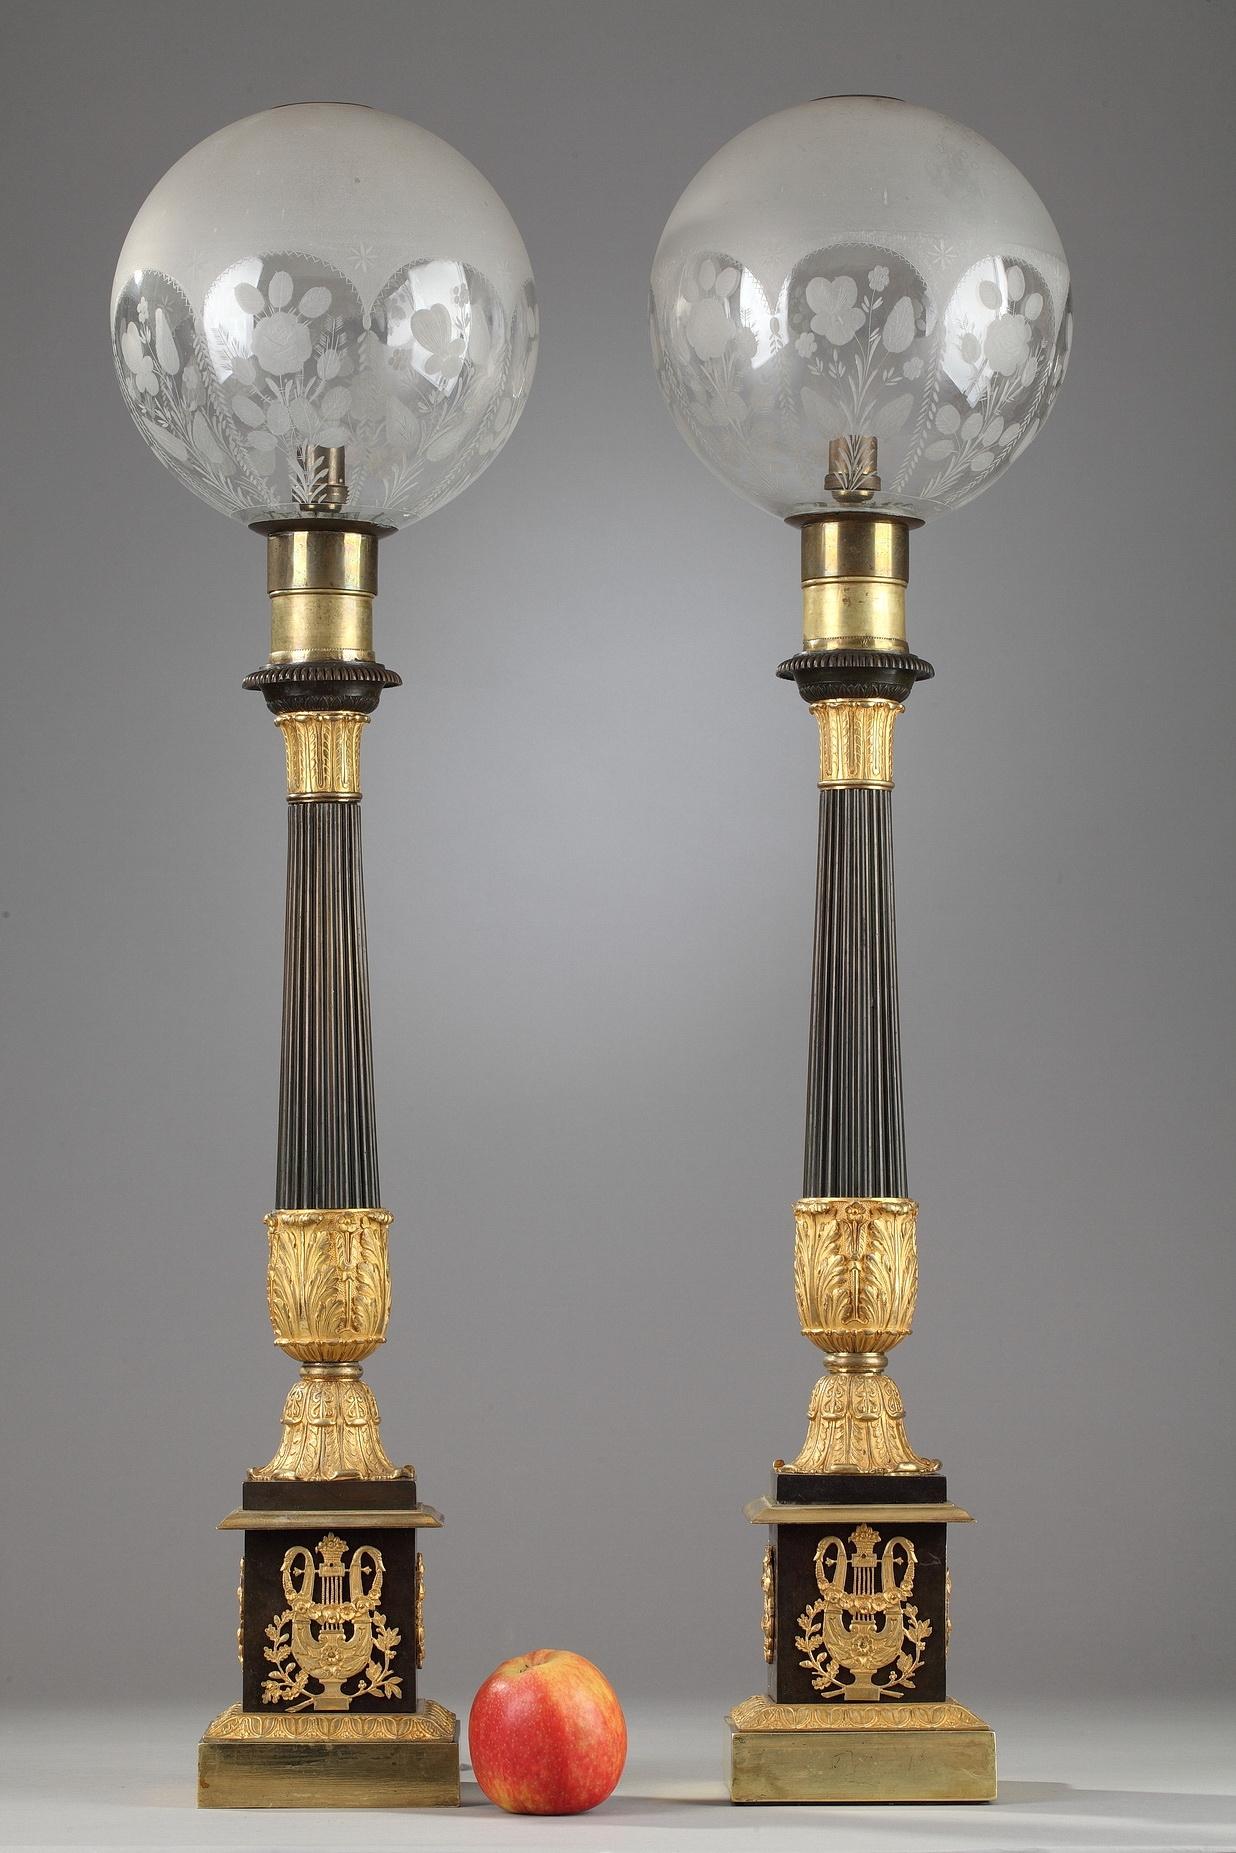 Pair of large Carcel lamps in bronze and glass. The fluted stem in patinated bronze is decorated with ormolu acanthus leaves. Each oil lamp is set on a small foliated base above a square plinth, decorated with crowns and lyres embellished with swans